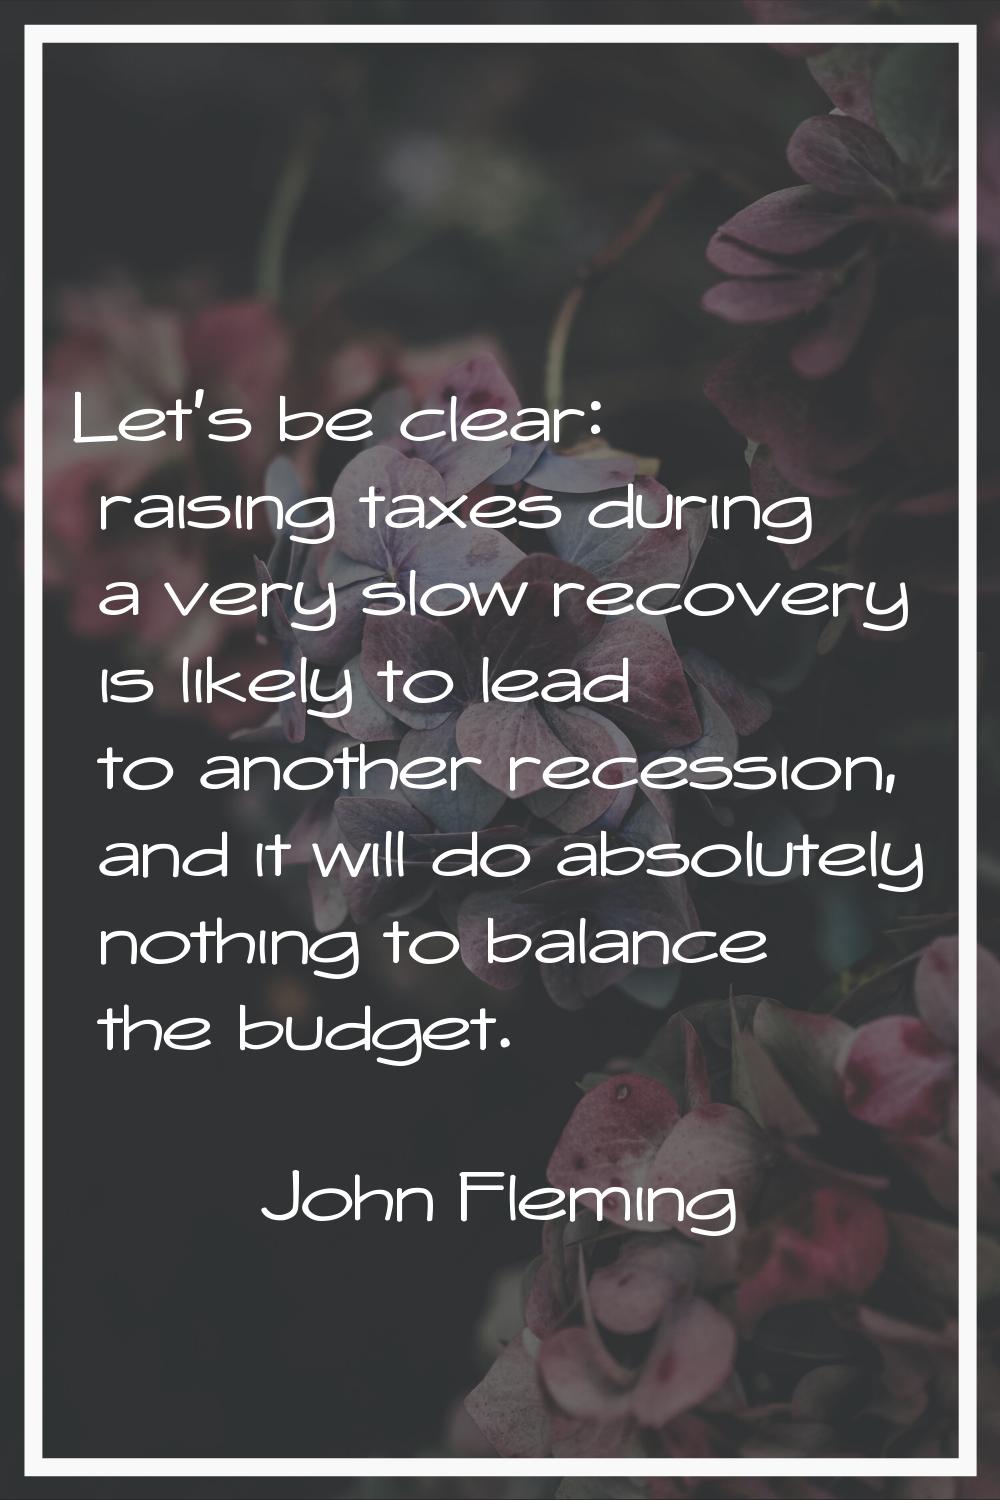 Let's be clear: raising taxes during a very slow recovery is likely to lead to another recession, a